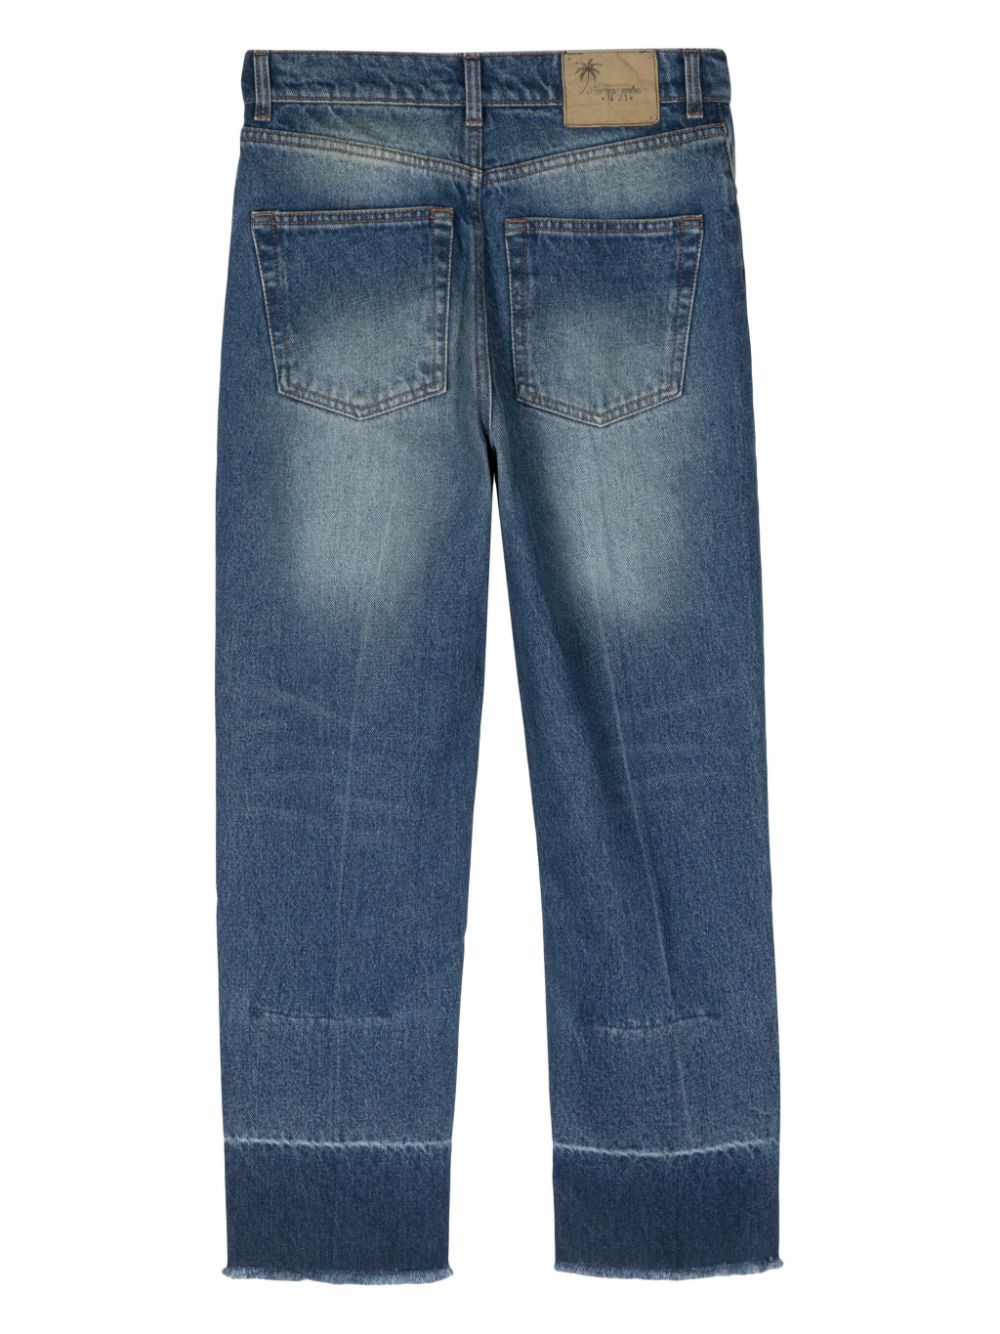 Nº21 mid-rise cropped jeans - Blauw